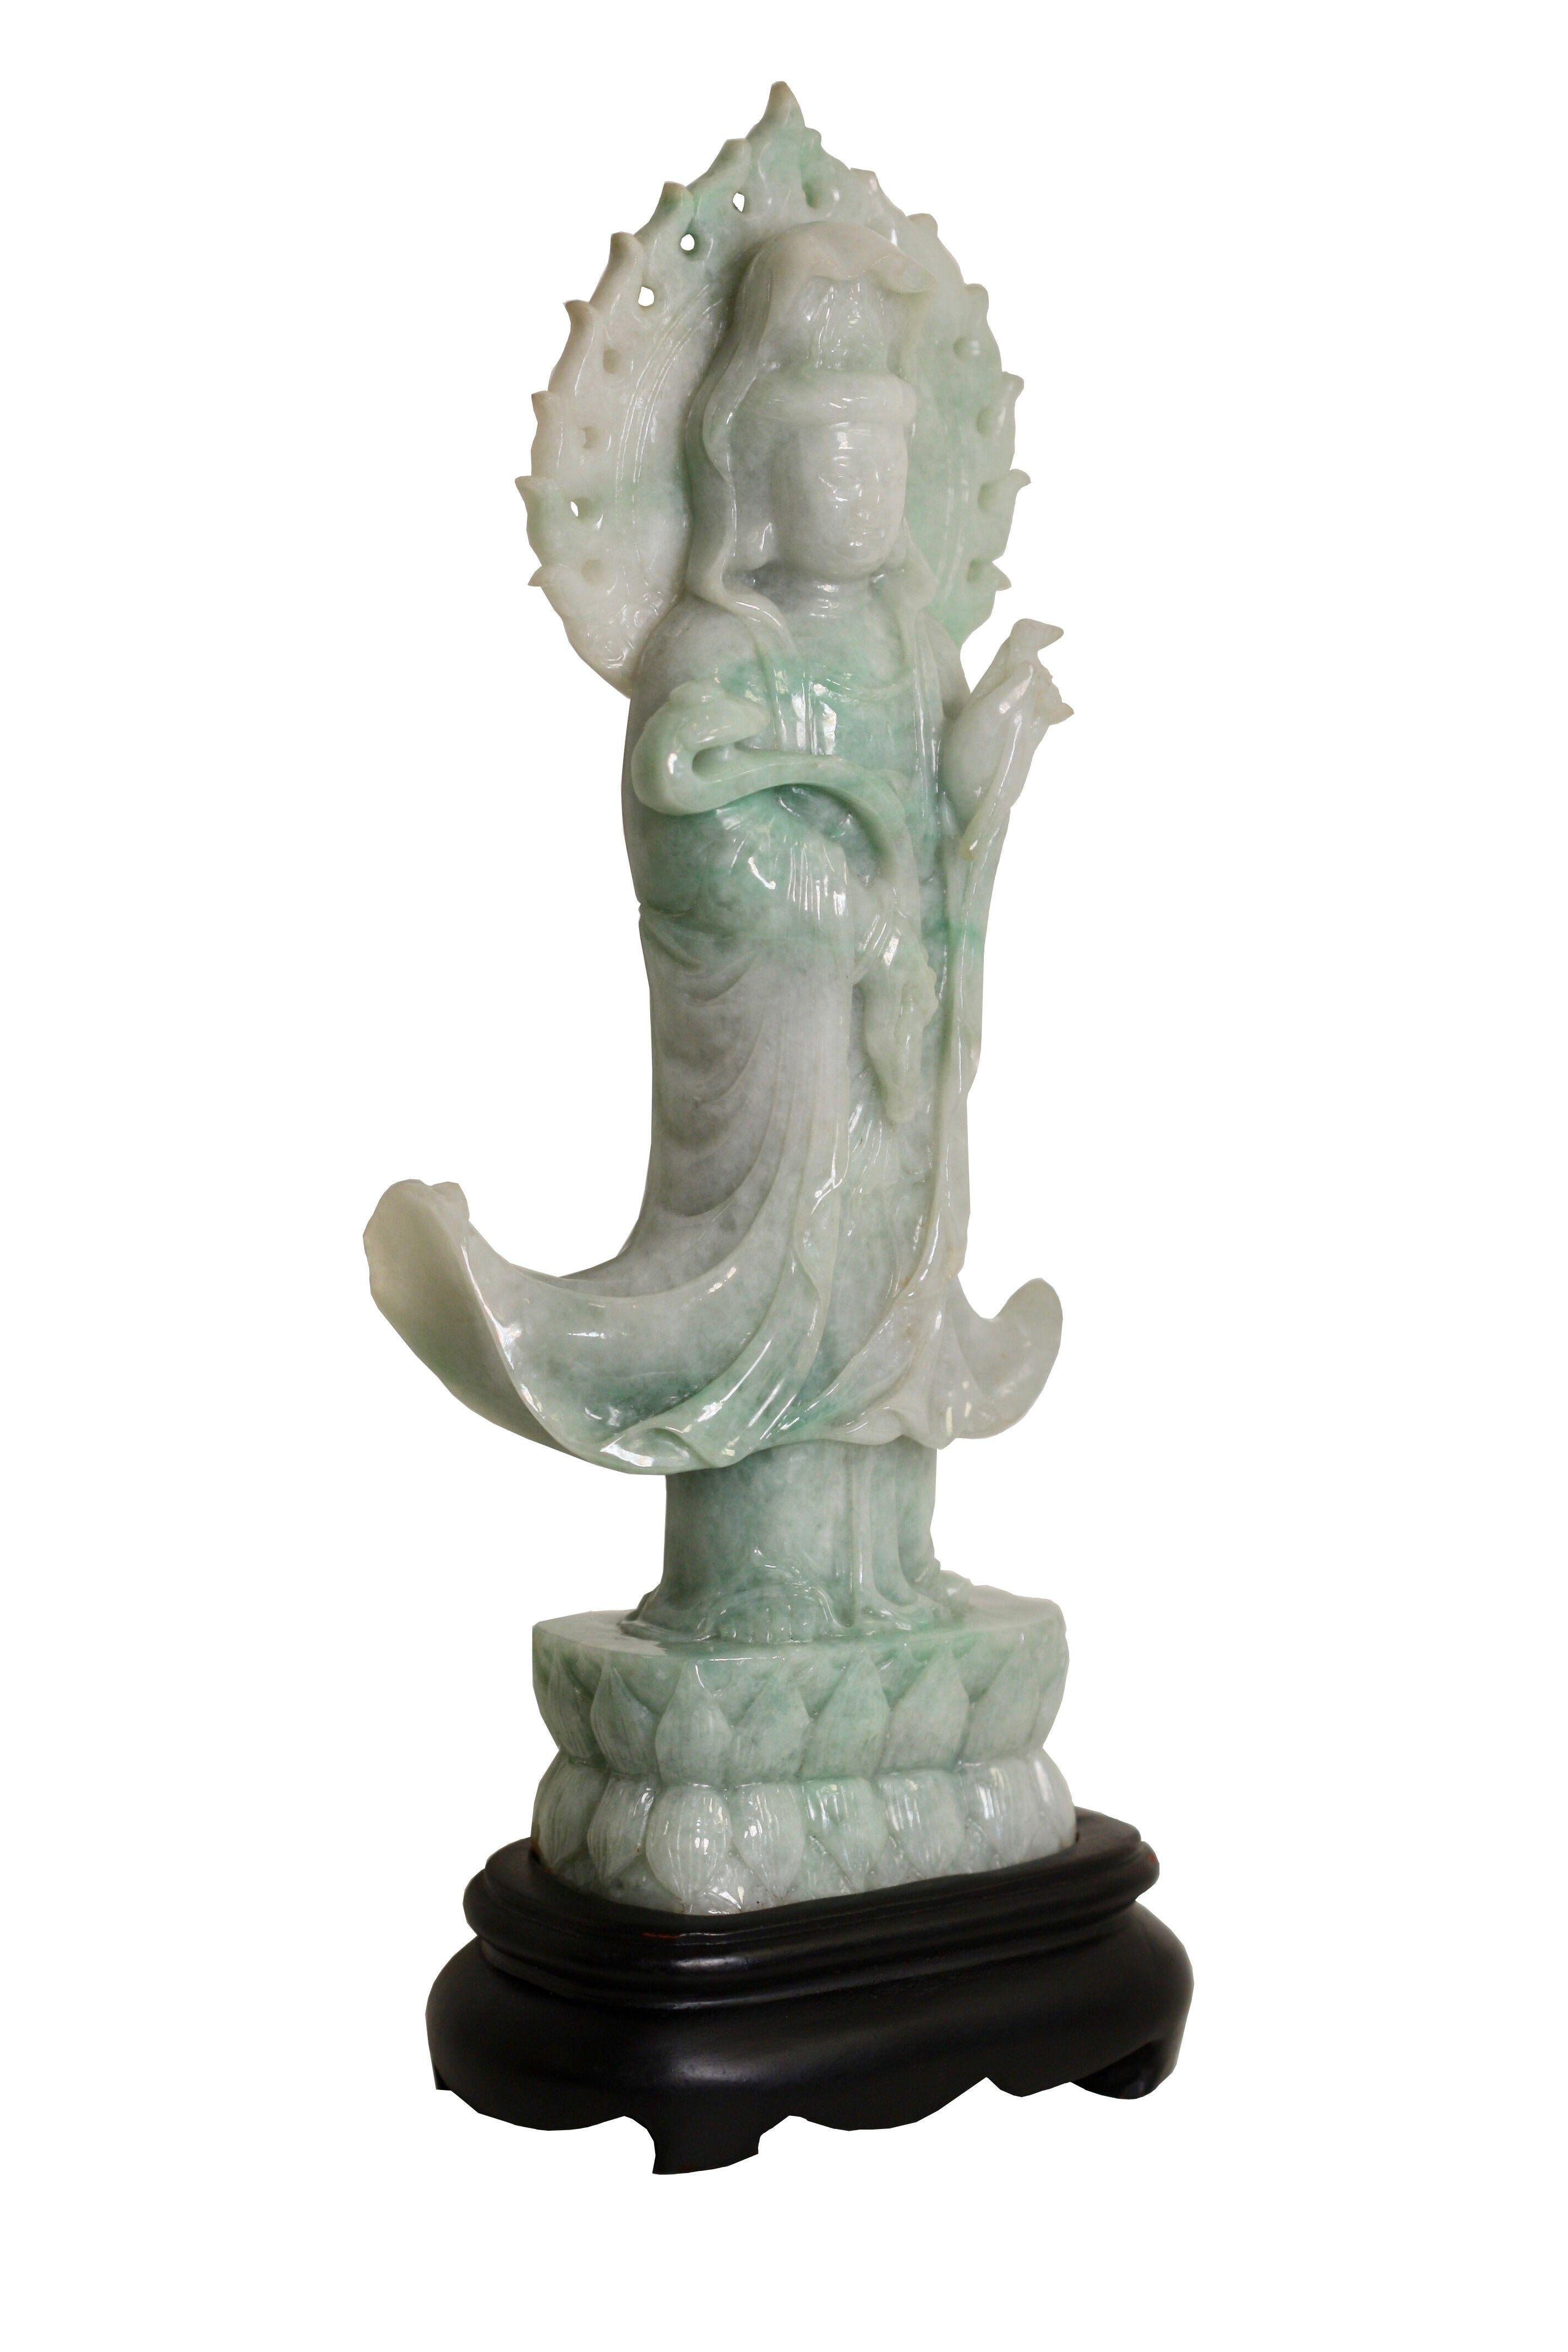 A carved Jade Figure of Guanyin, Chinese
The deity standing on a rocky base in front of an oval mandorla, dressed in long flowing robes open at the chest, the right arm supporting a ruyi sceptre, the face with a serene expression framed by hair set